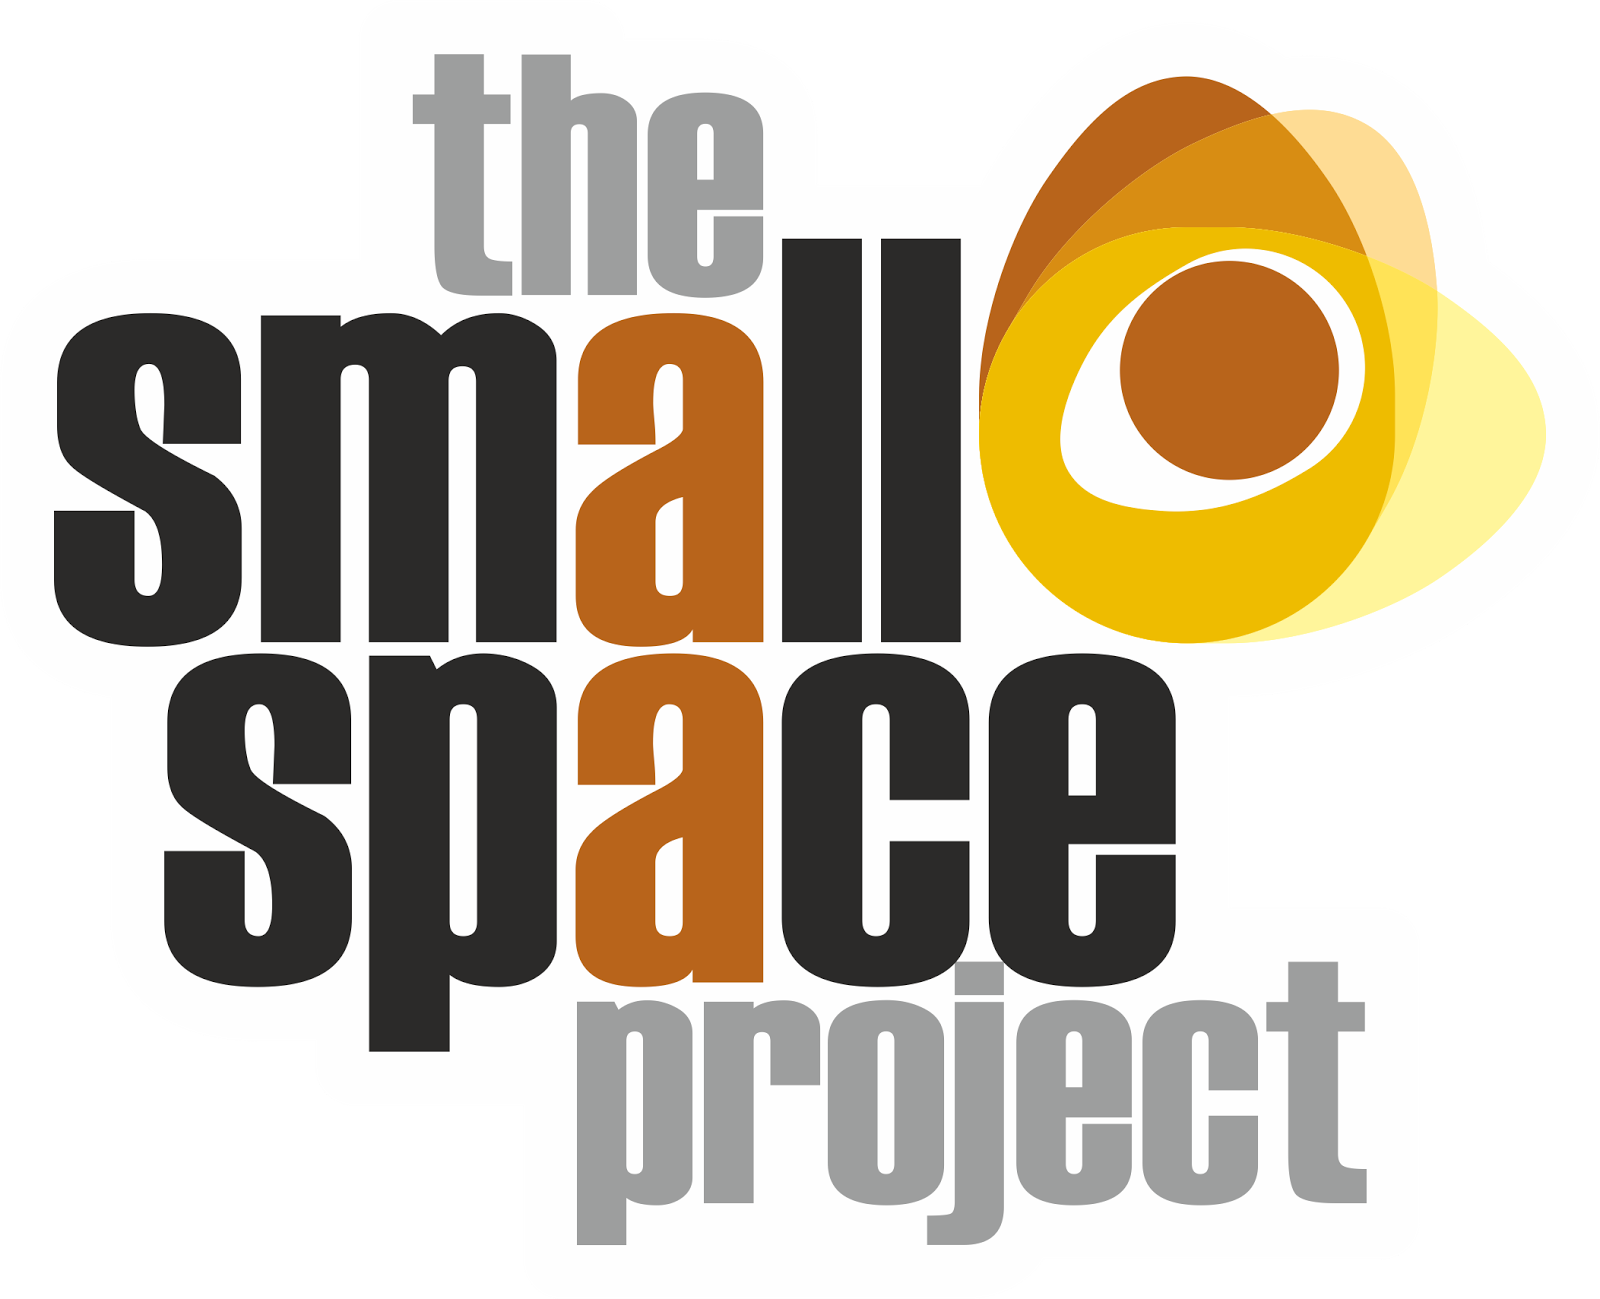 The Small Space Project